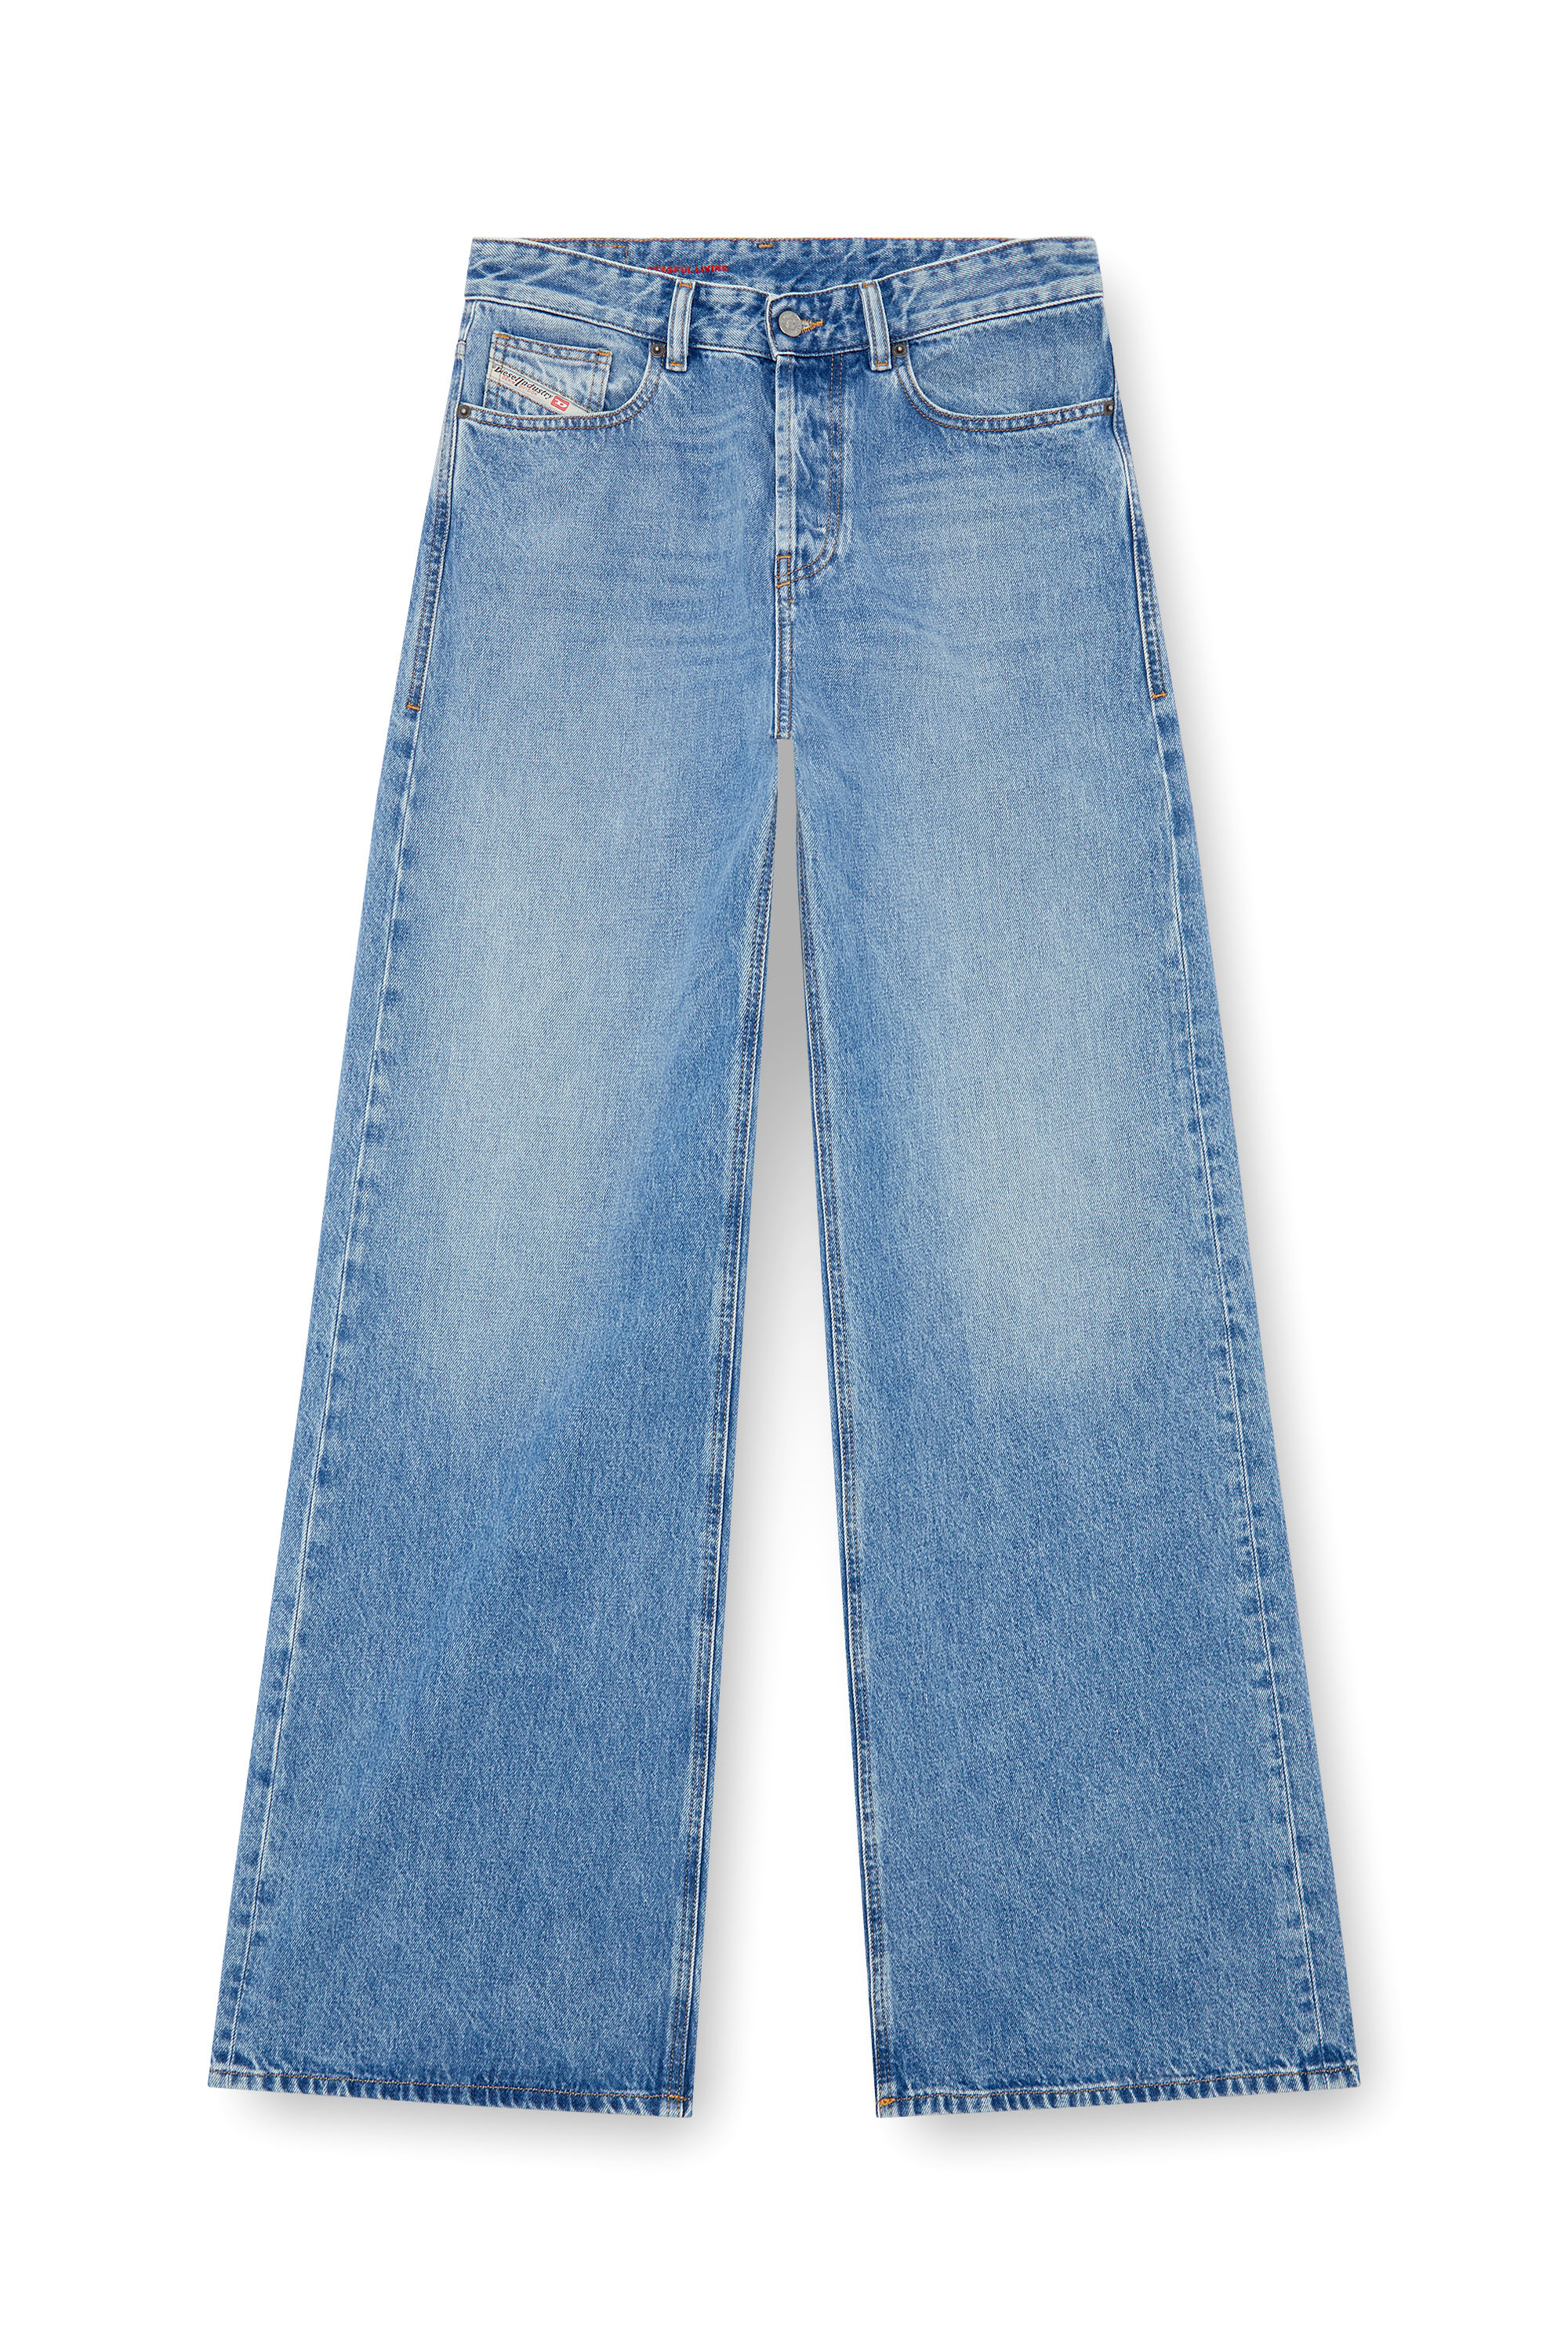 Diesel - Straight Jeans 1996 D-Sire 09I29, Mujer Straight Jeans - 1996 D-Sire in Azul marino - Image 7